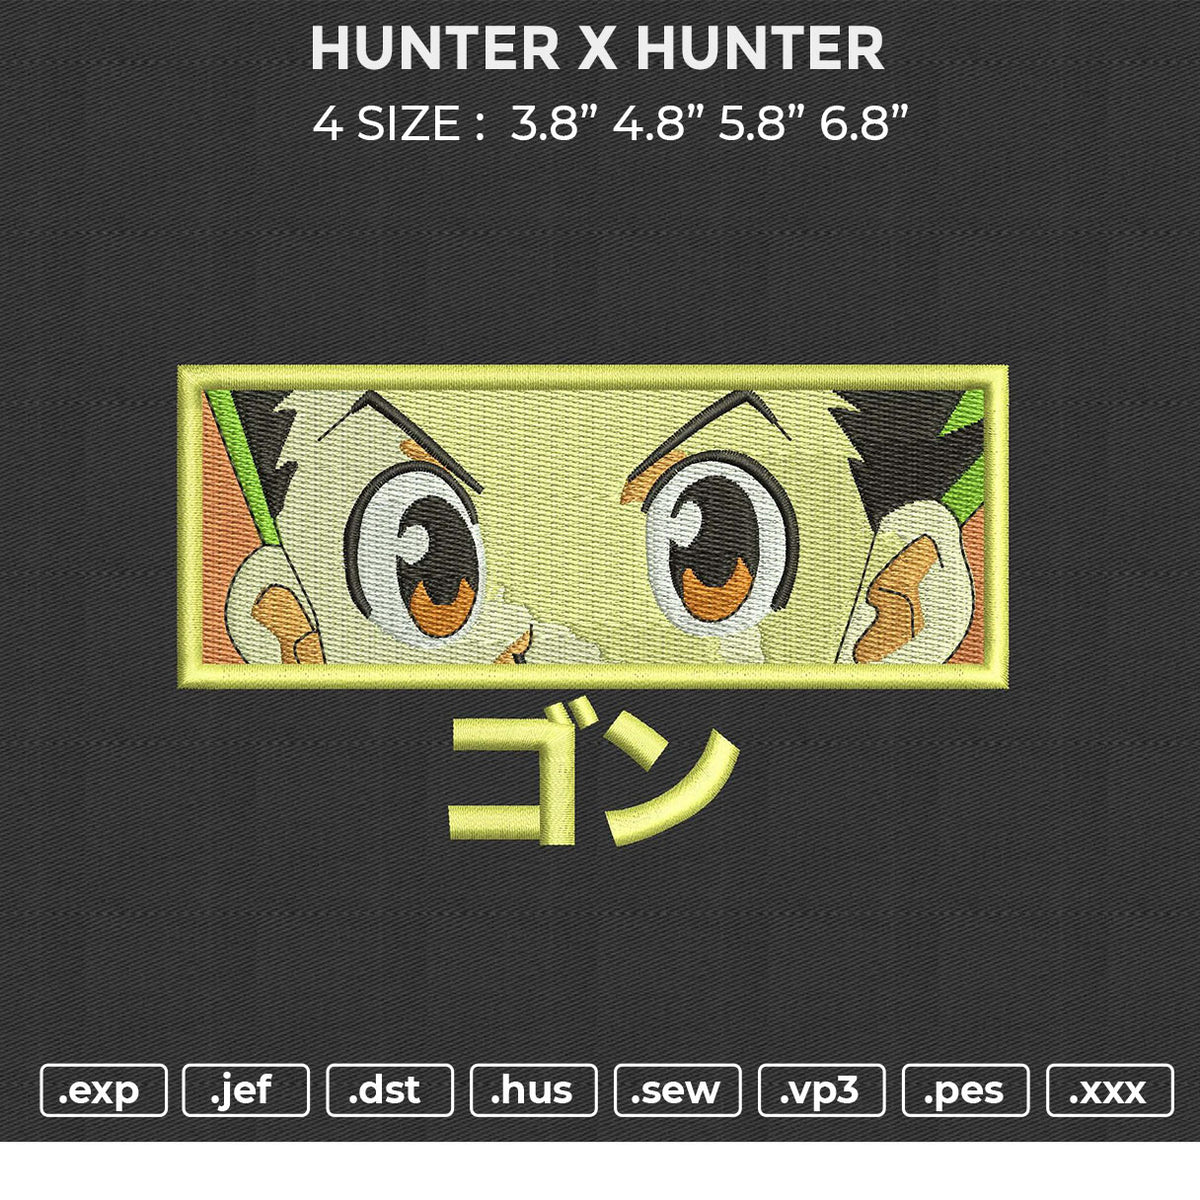 Digital Embroidery-Ging Freecss HxH Character 